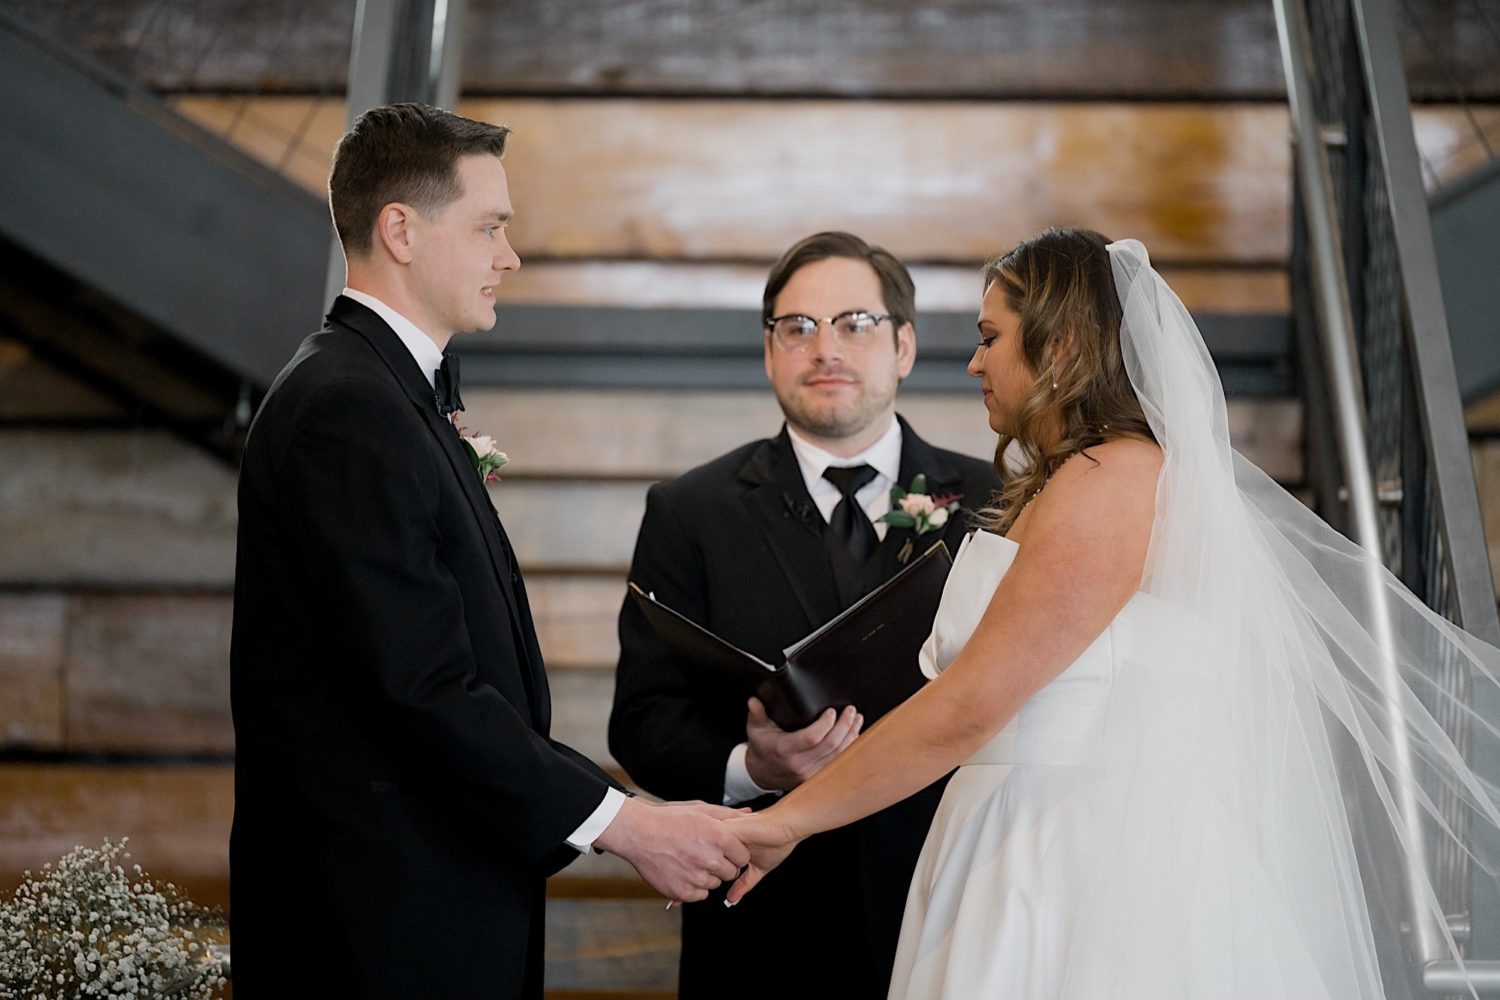 wedding vows at the river center wedding ceremony